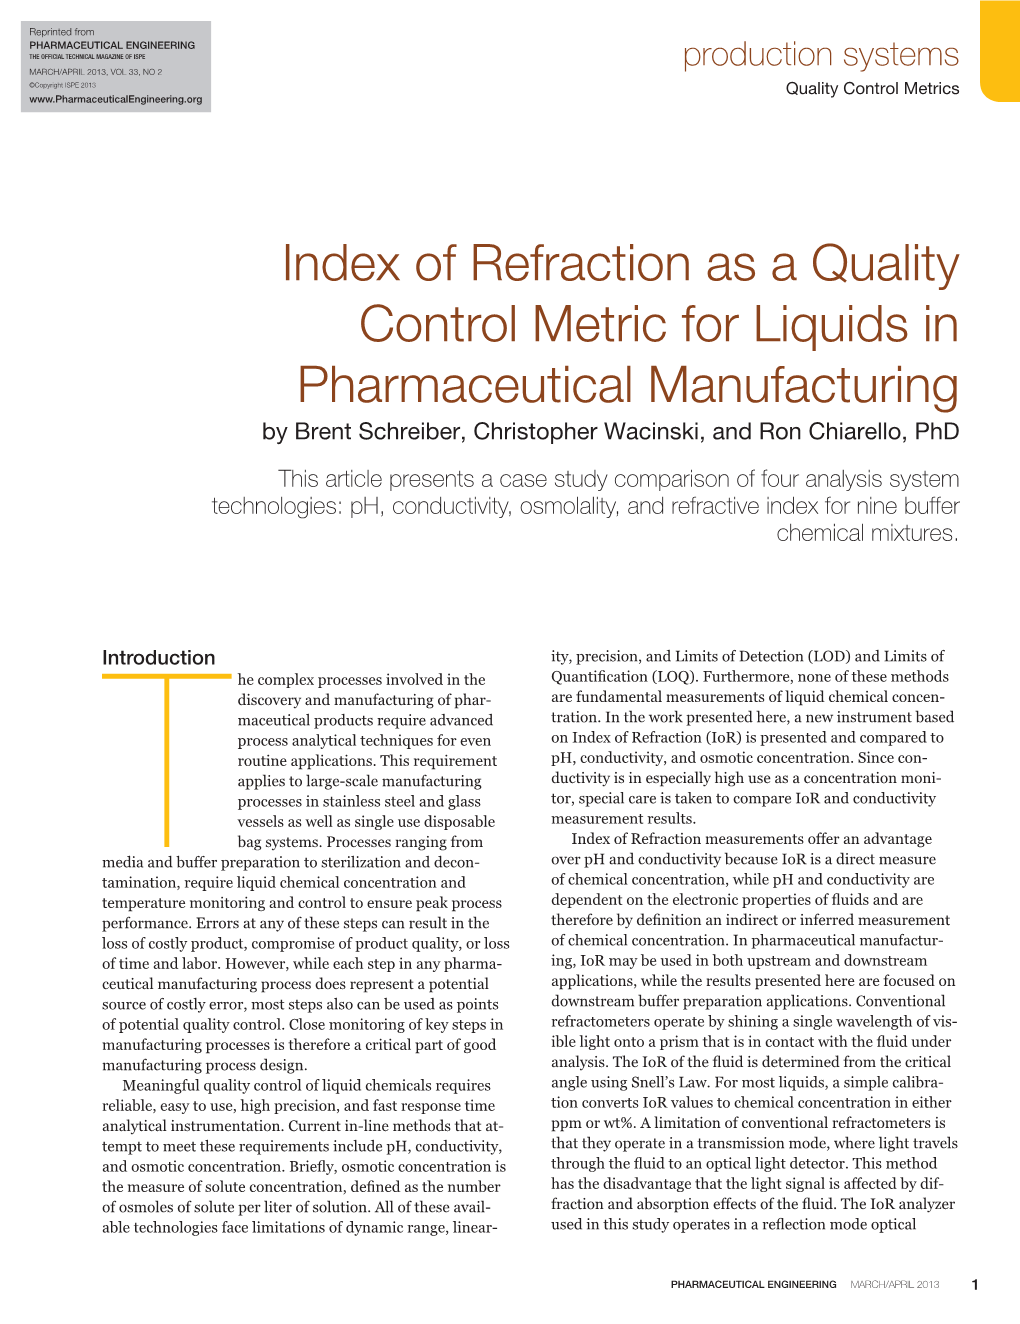 Index of Refraction As a Quality Control Metric for Liquids In